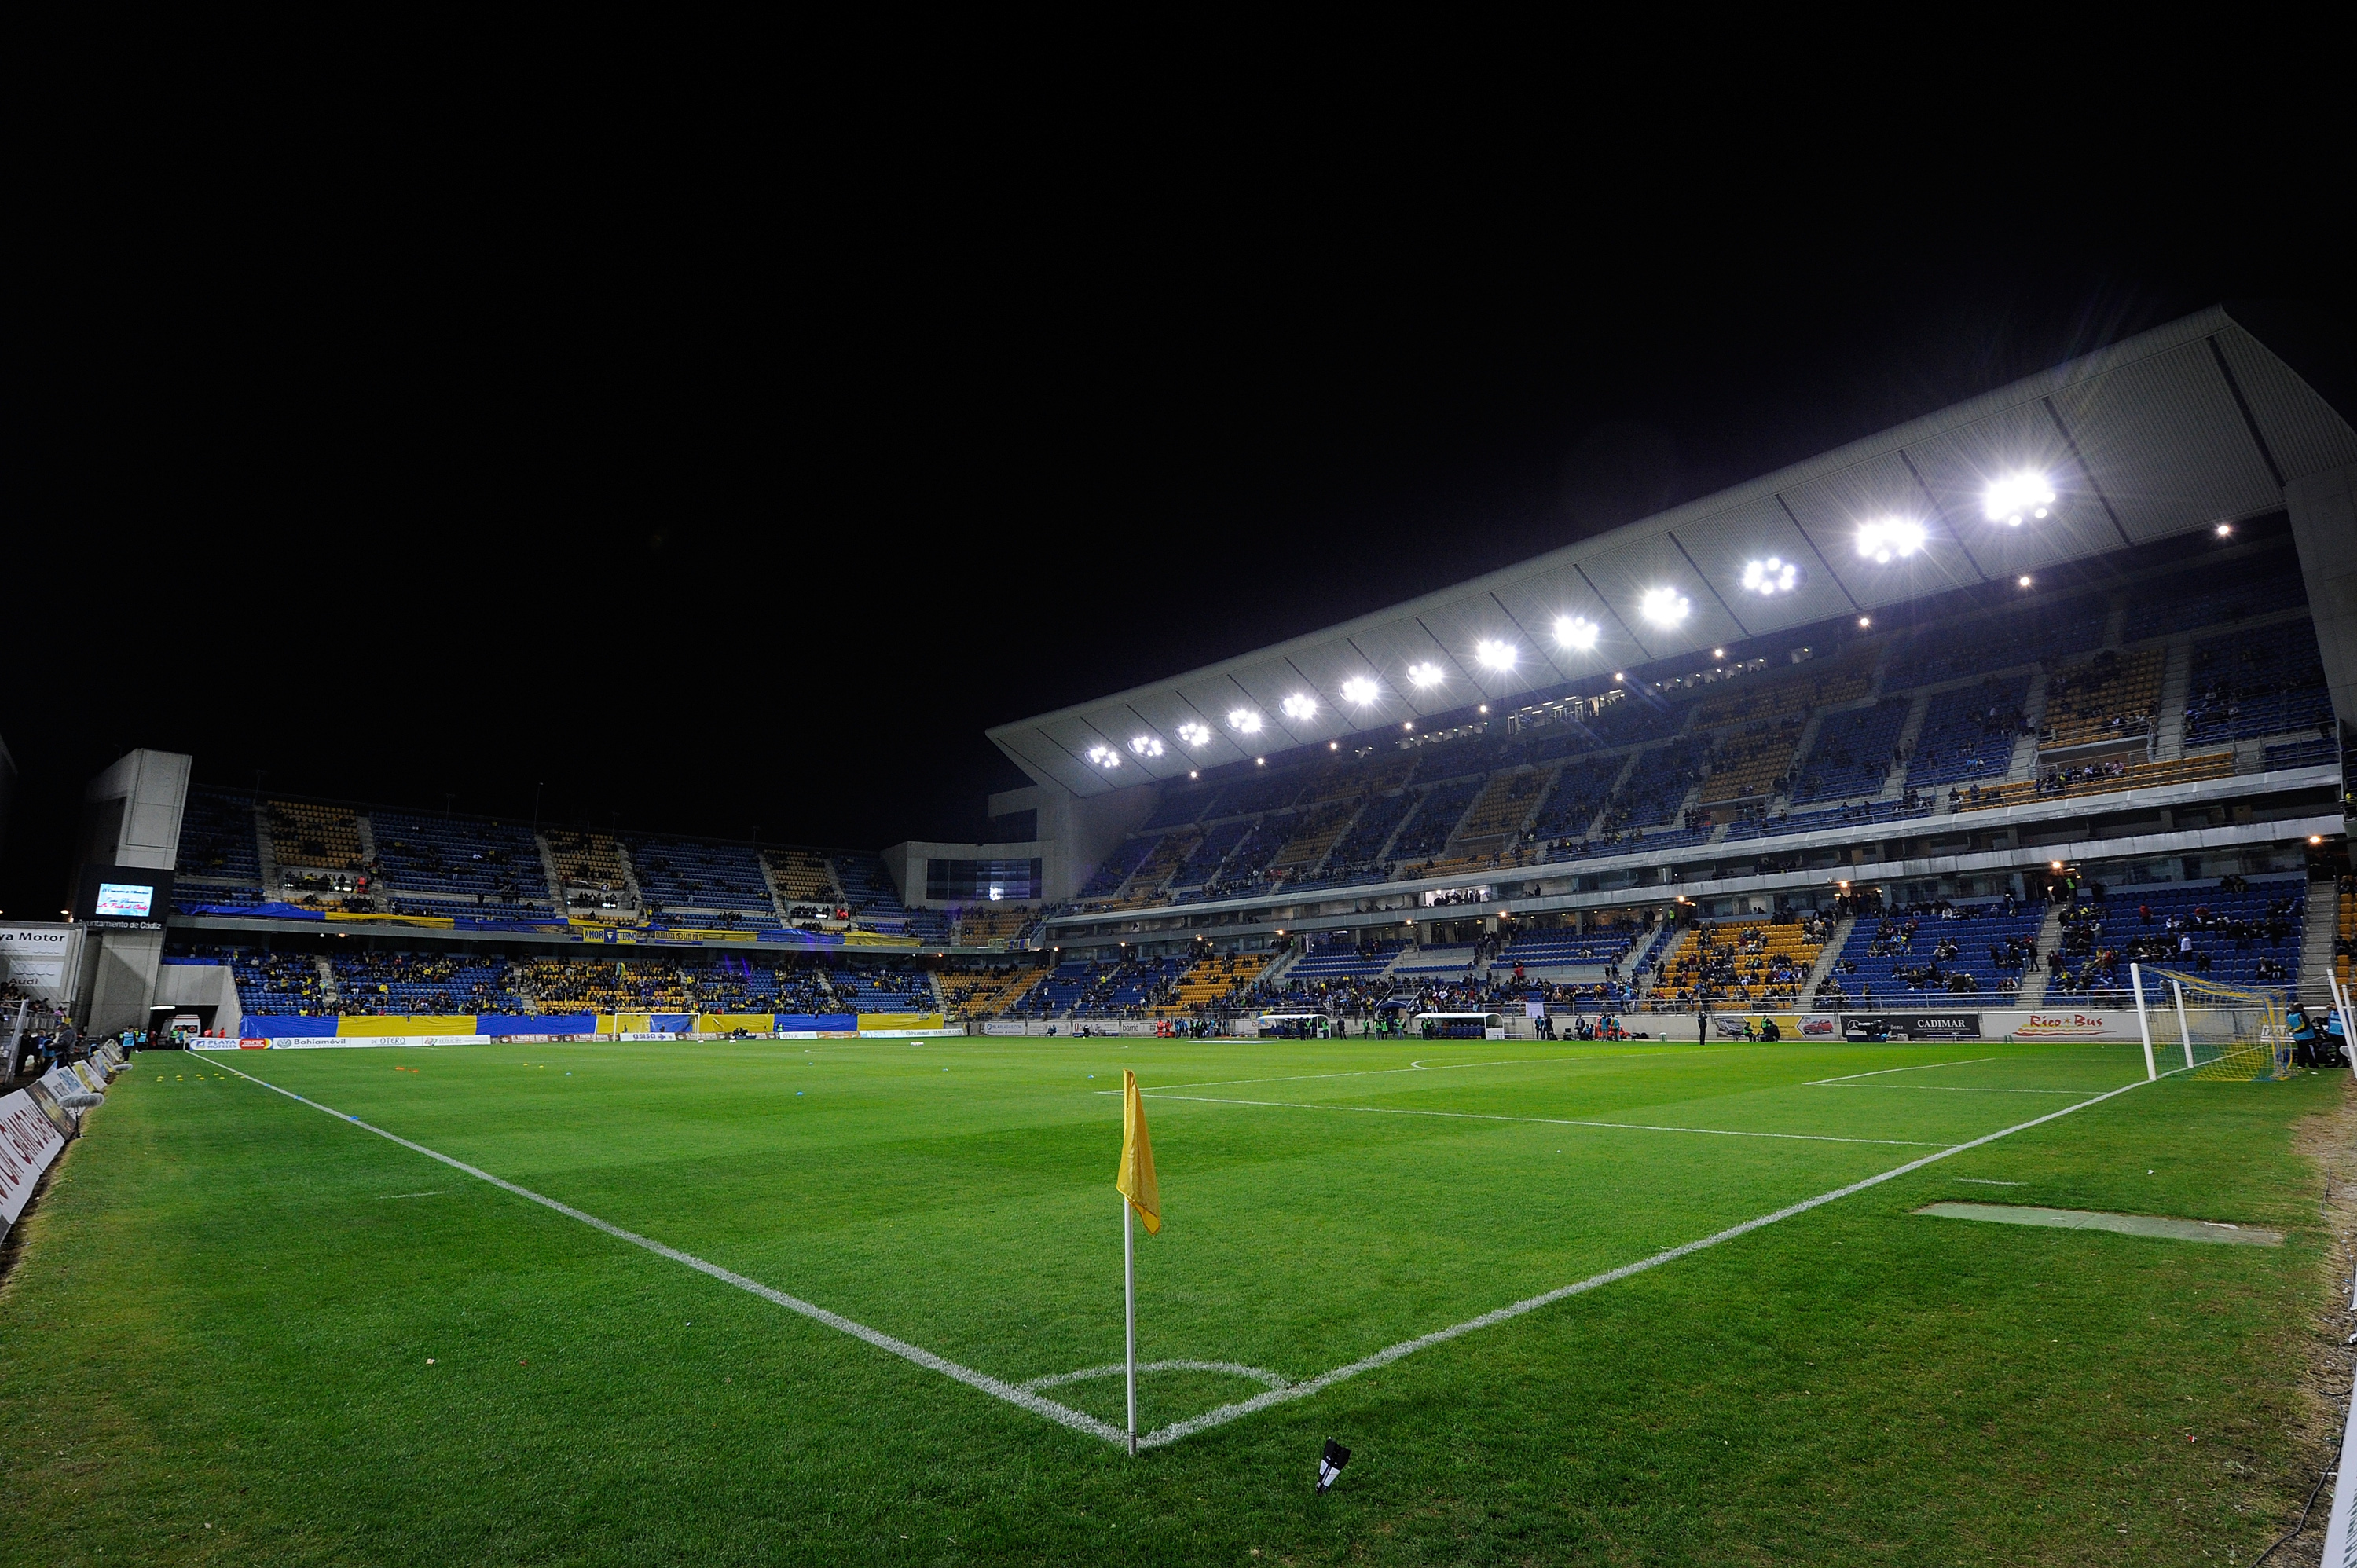 CADIZ, SPAIN - DECEMBER 02:  View of Ramon de Carranza stadium ahead of the Copa del Rey Round of 32 First Leg match between Cadiz and Real Madrid at Ramon de Carranza stadium on December 2, 2015 in Cadiz, Spain.  (Photo by Denis Doyle/Getty Images)